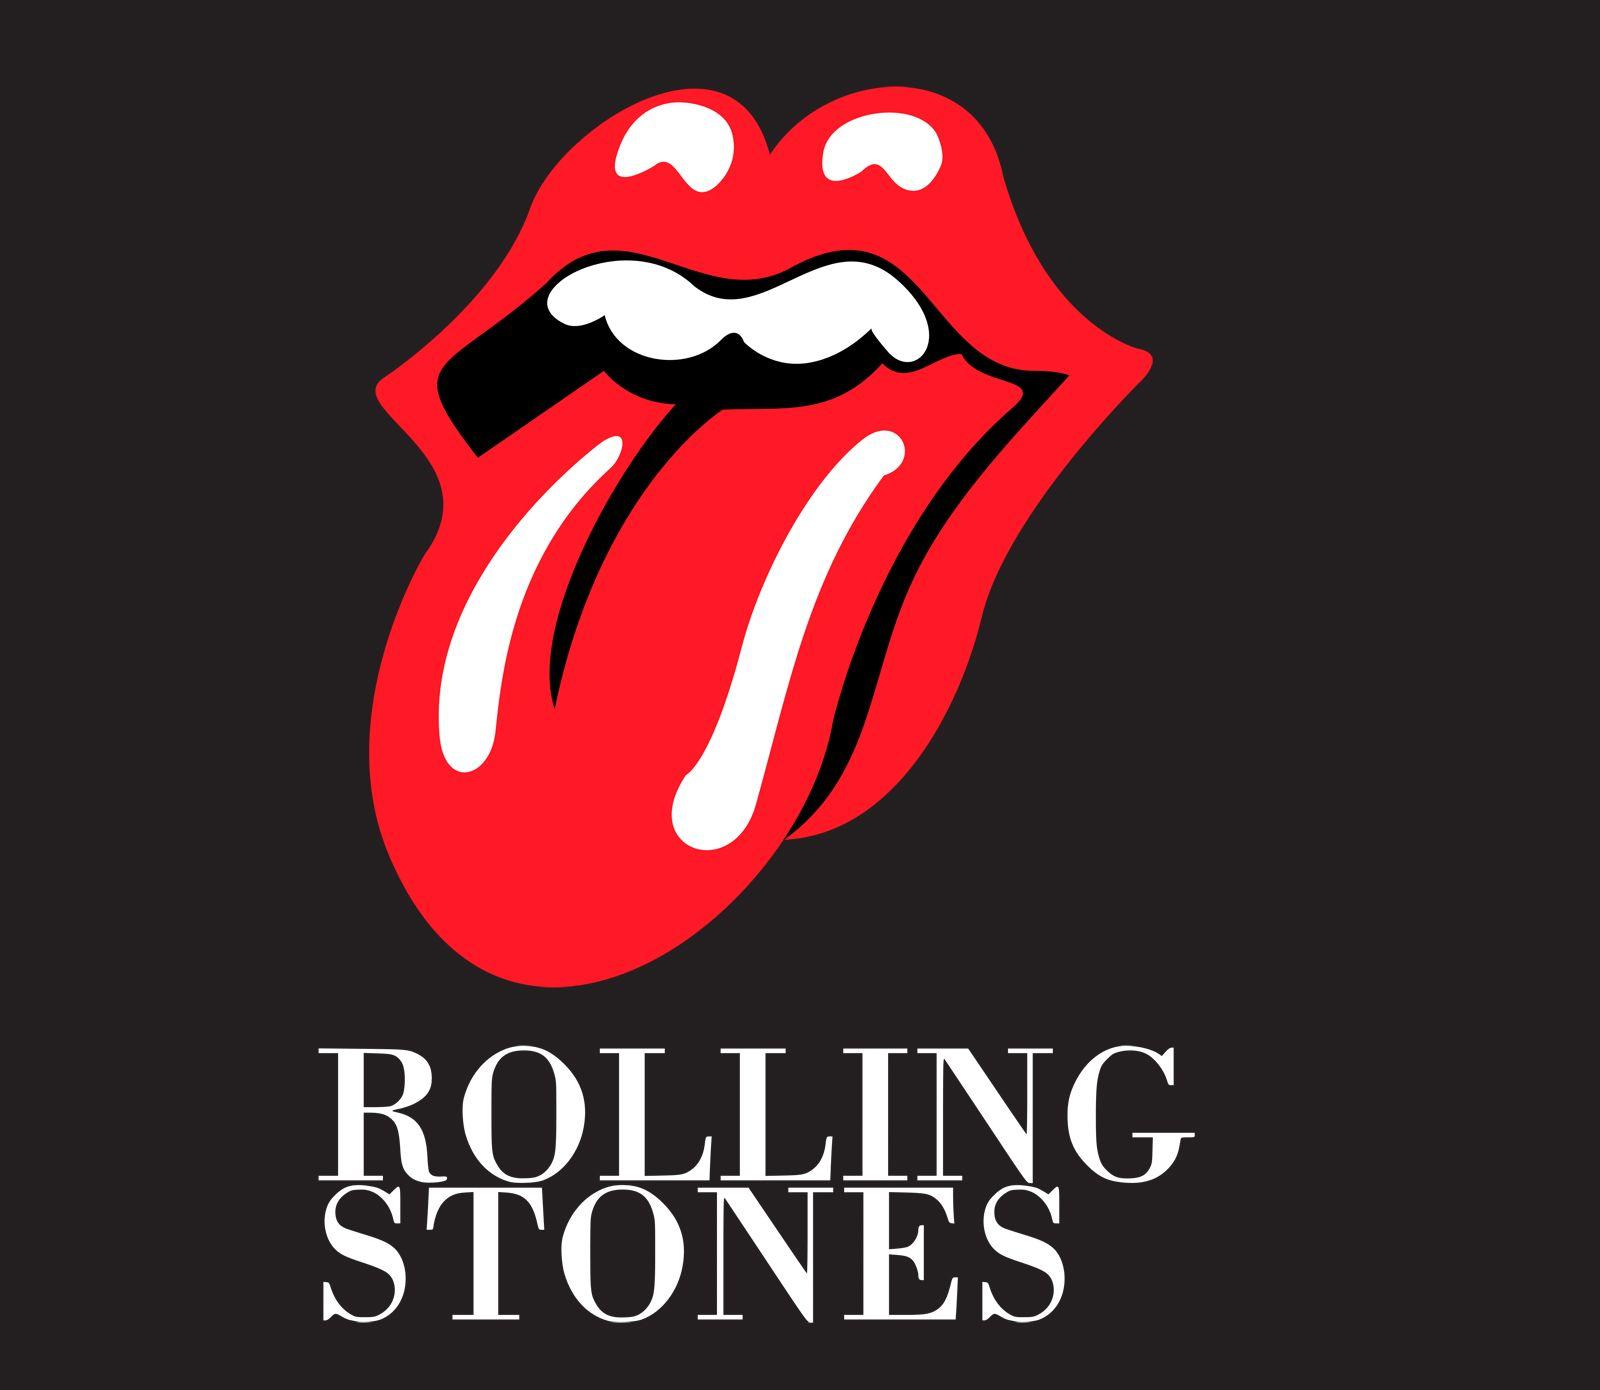 New Rolling Stone Logo - Rolling Stones Logo, Rolling Stones Symbol, Meaning, History